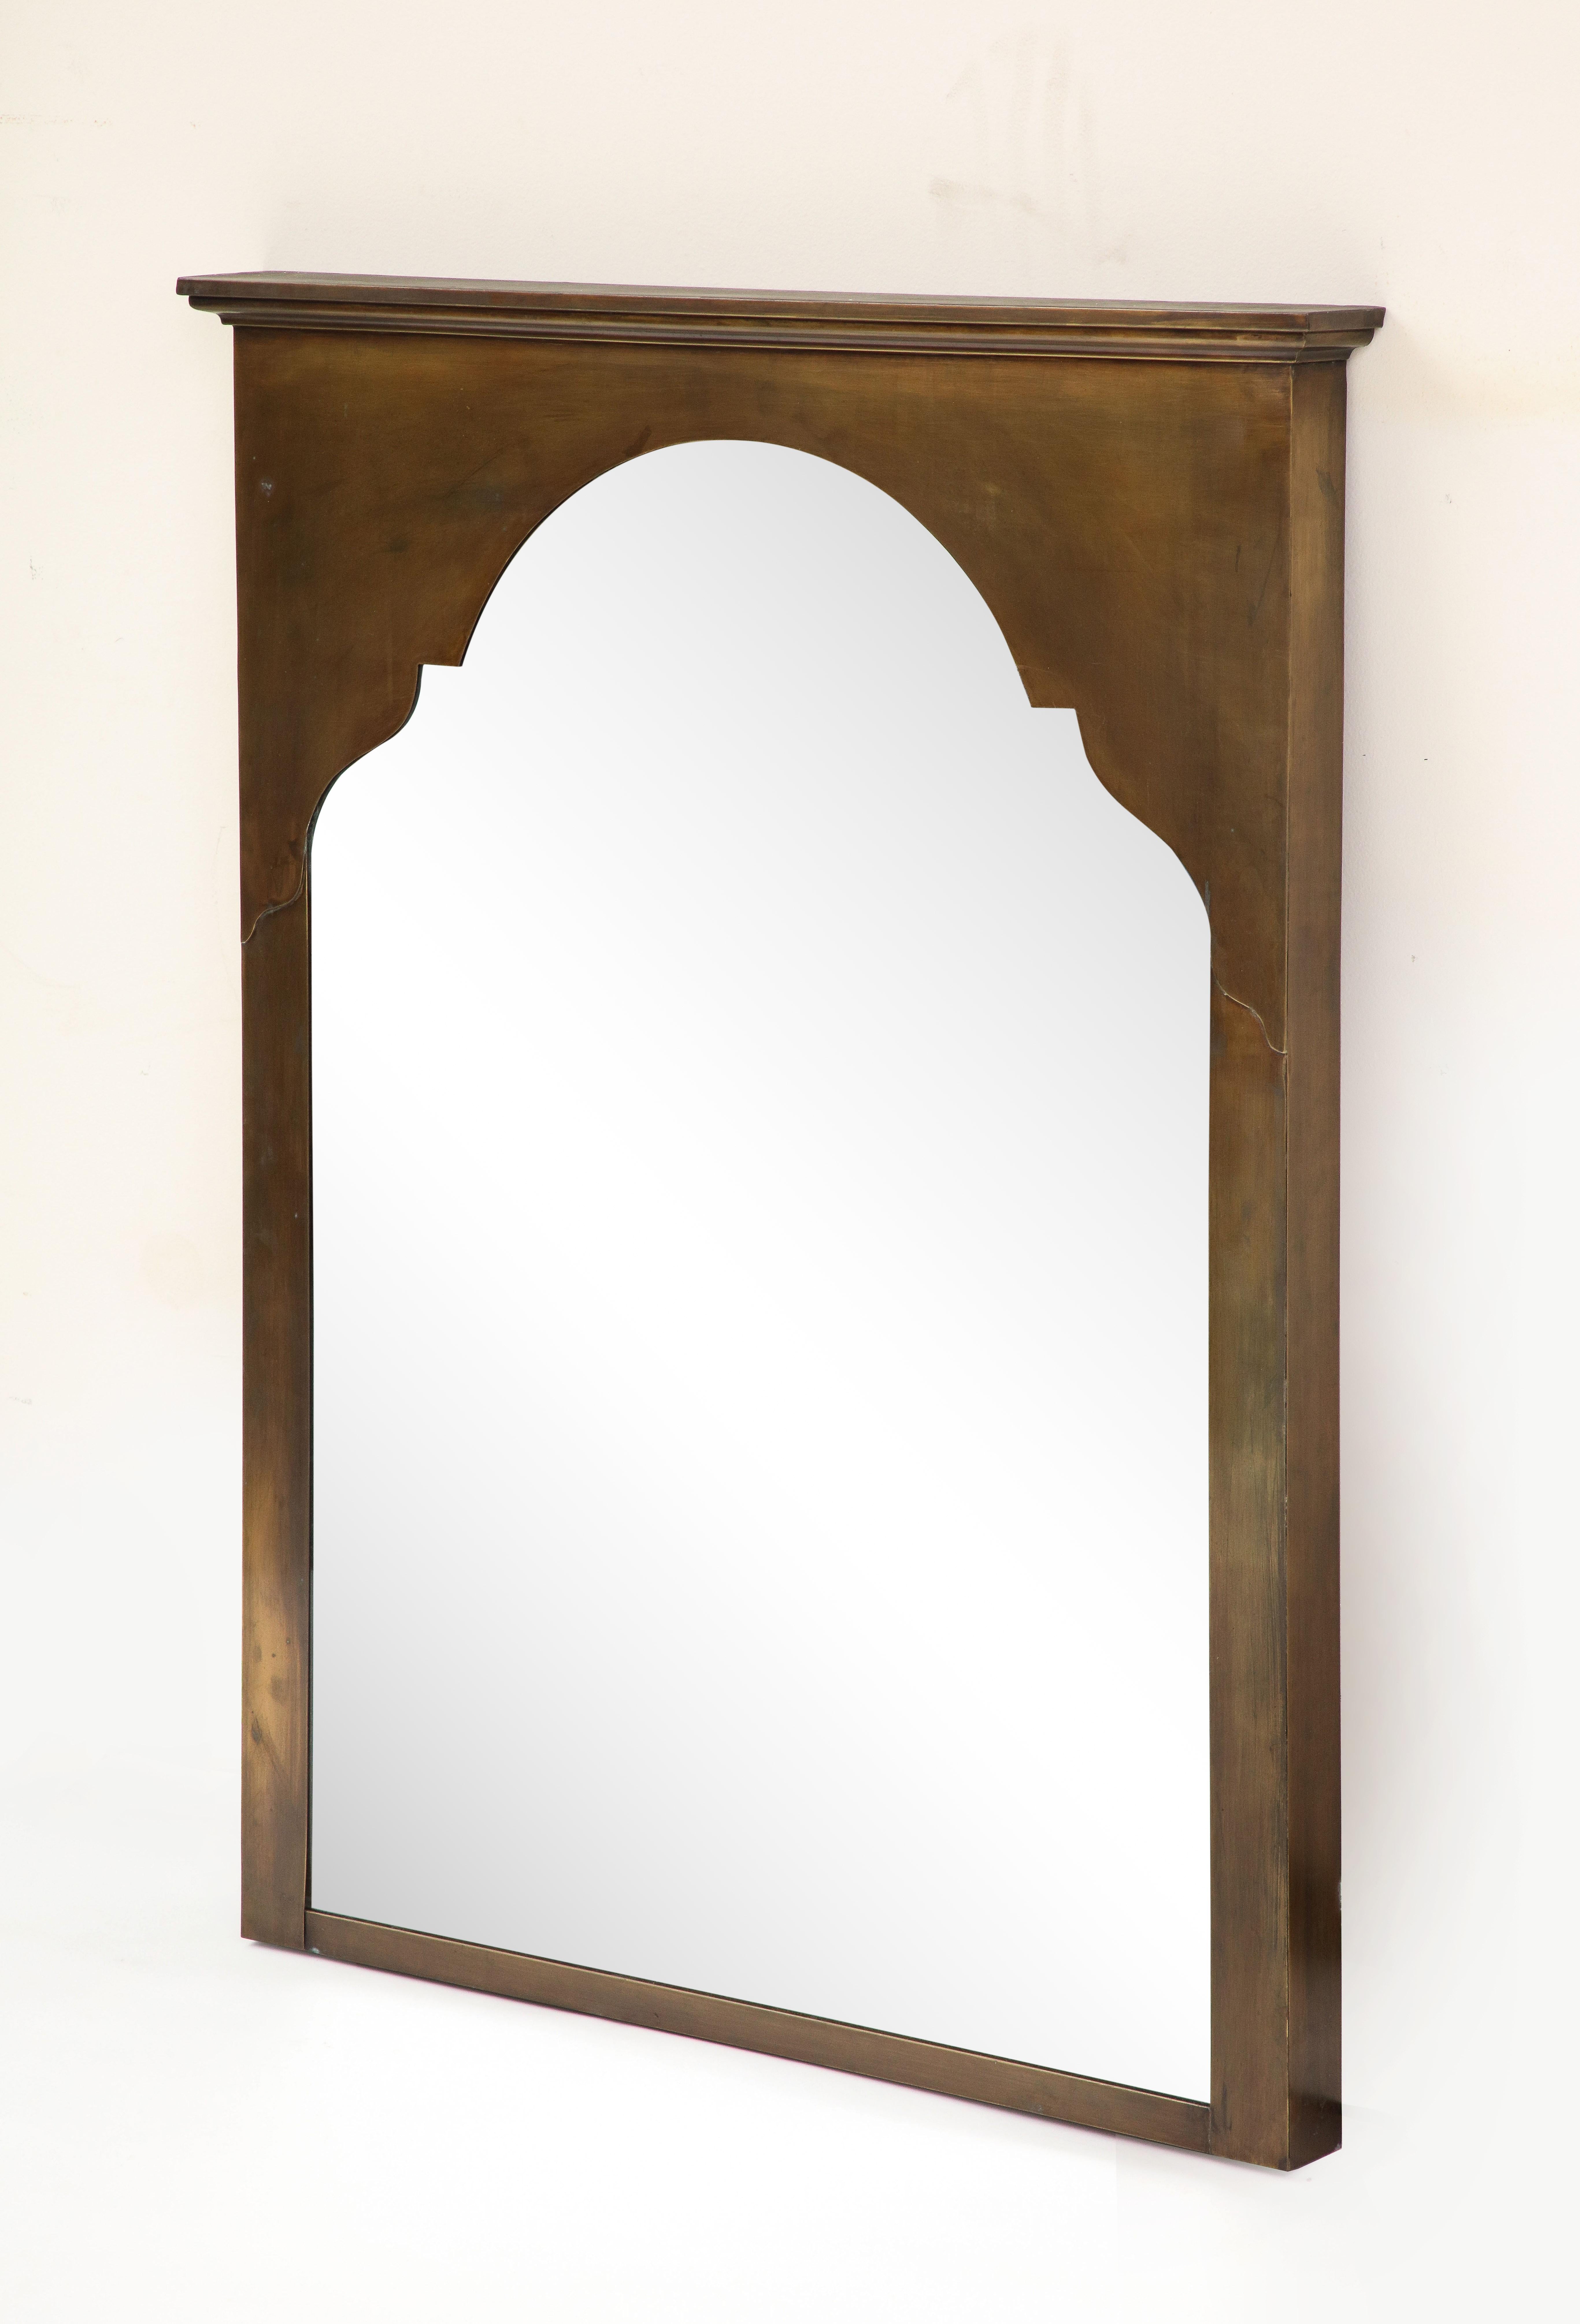 Midcentury Moroccan style brass wall mirror, 1960s. Masonite back and hanging wire.